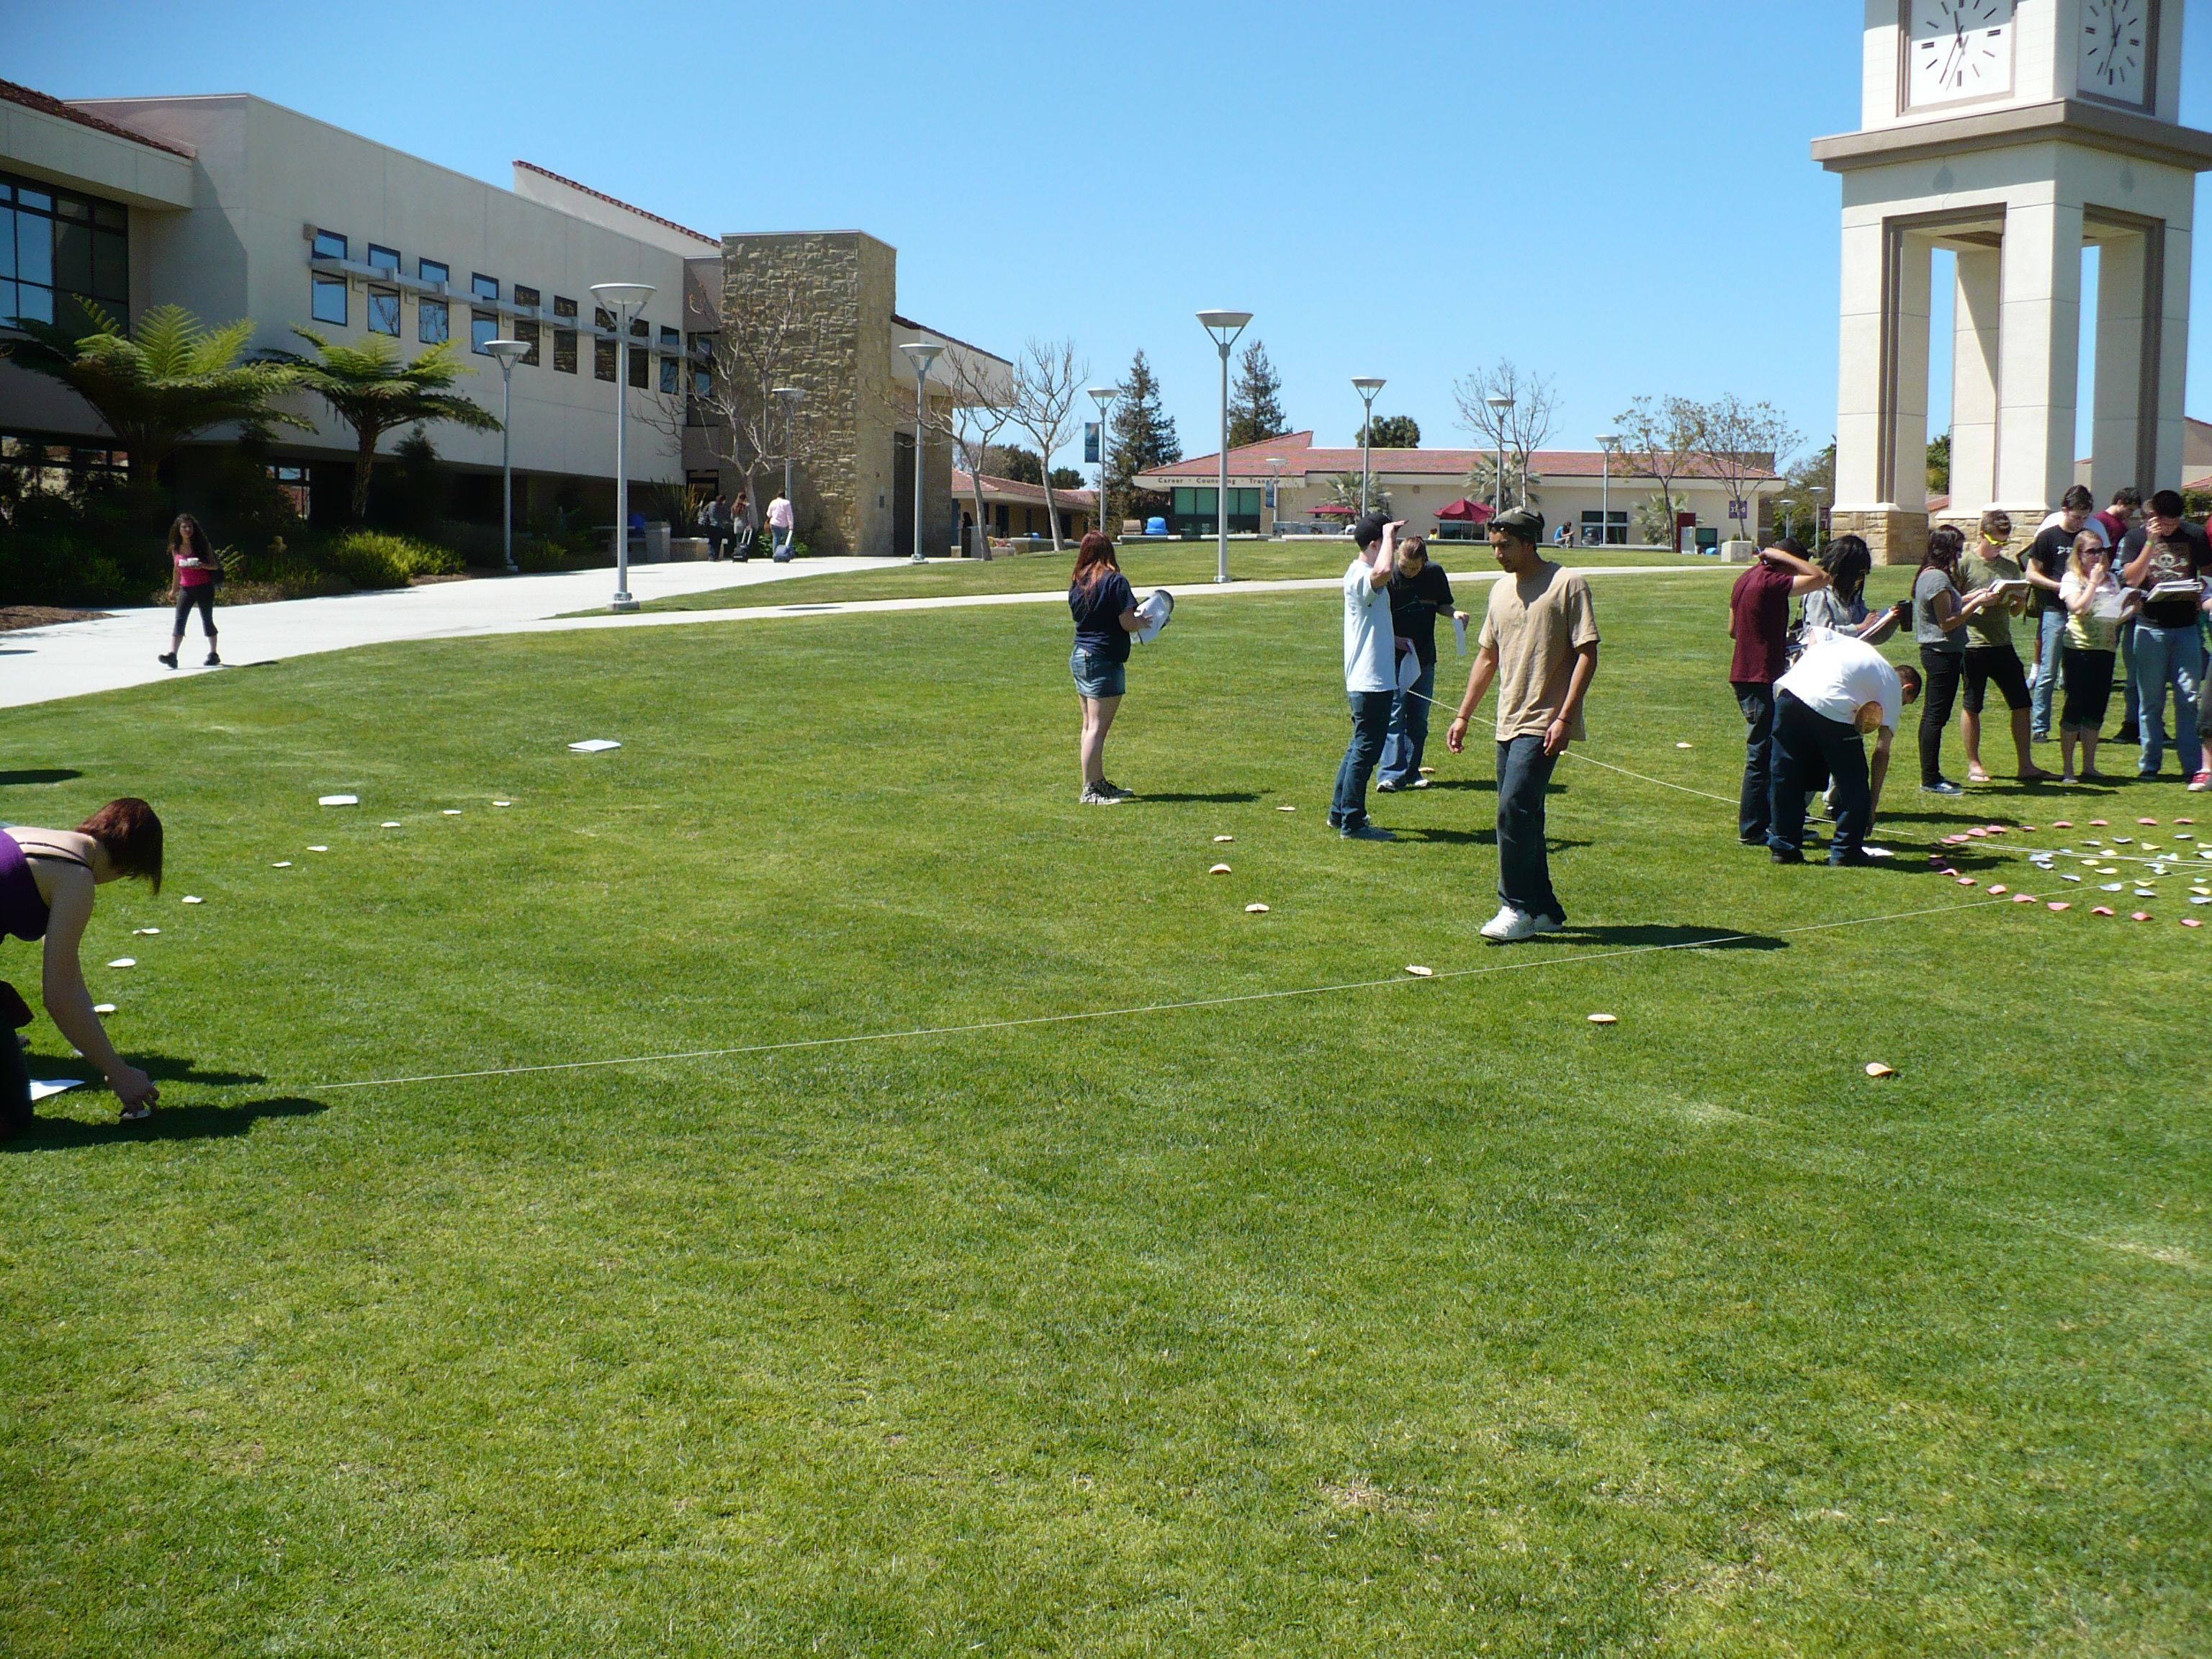 students assembling human orrery outside on lawn